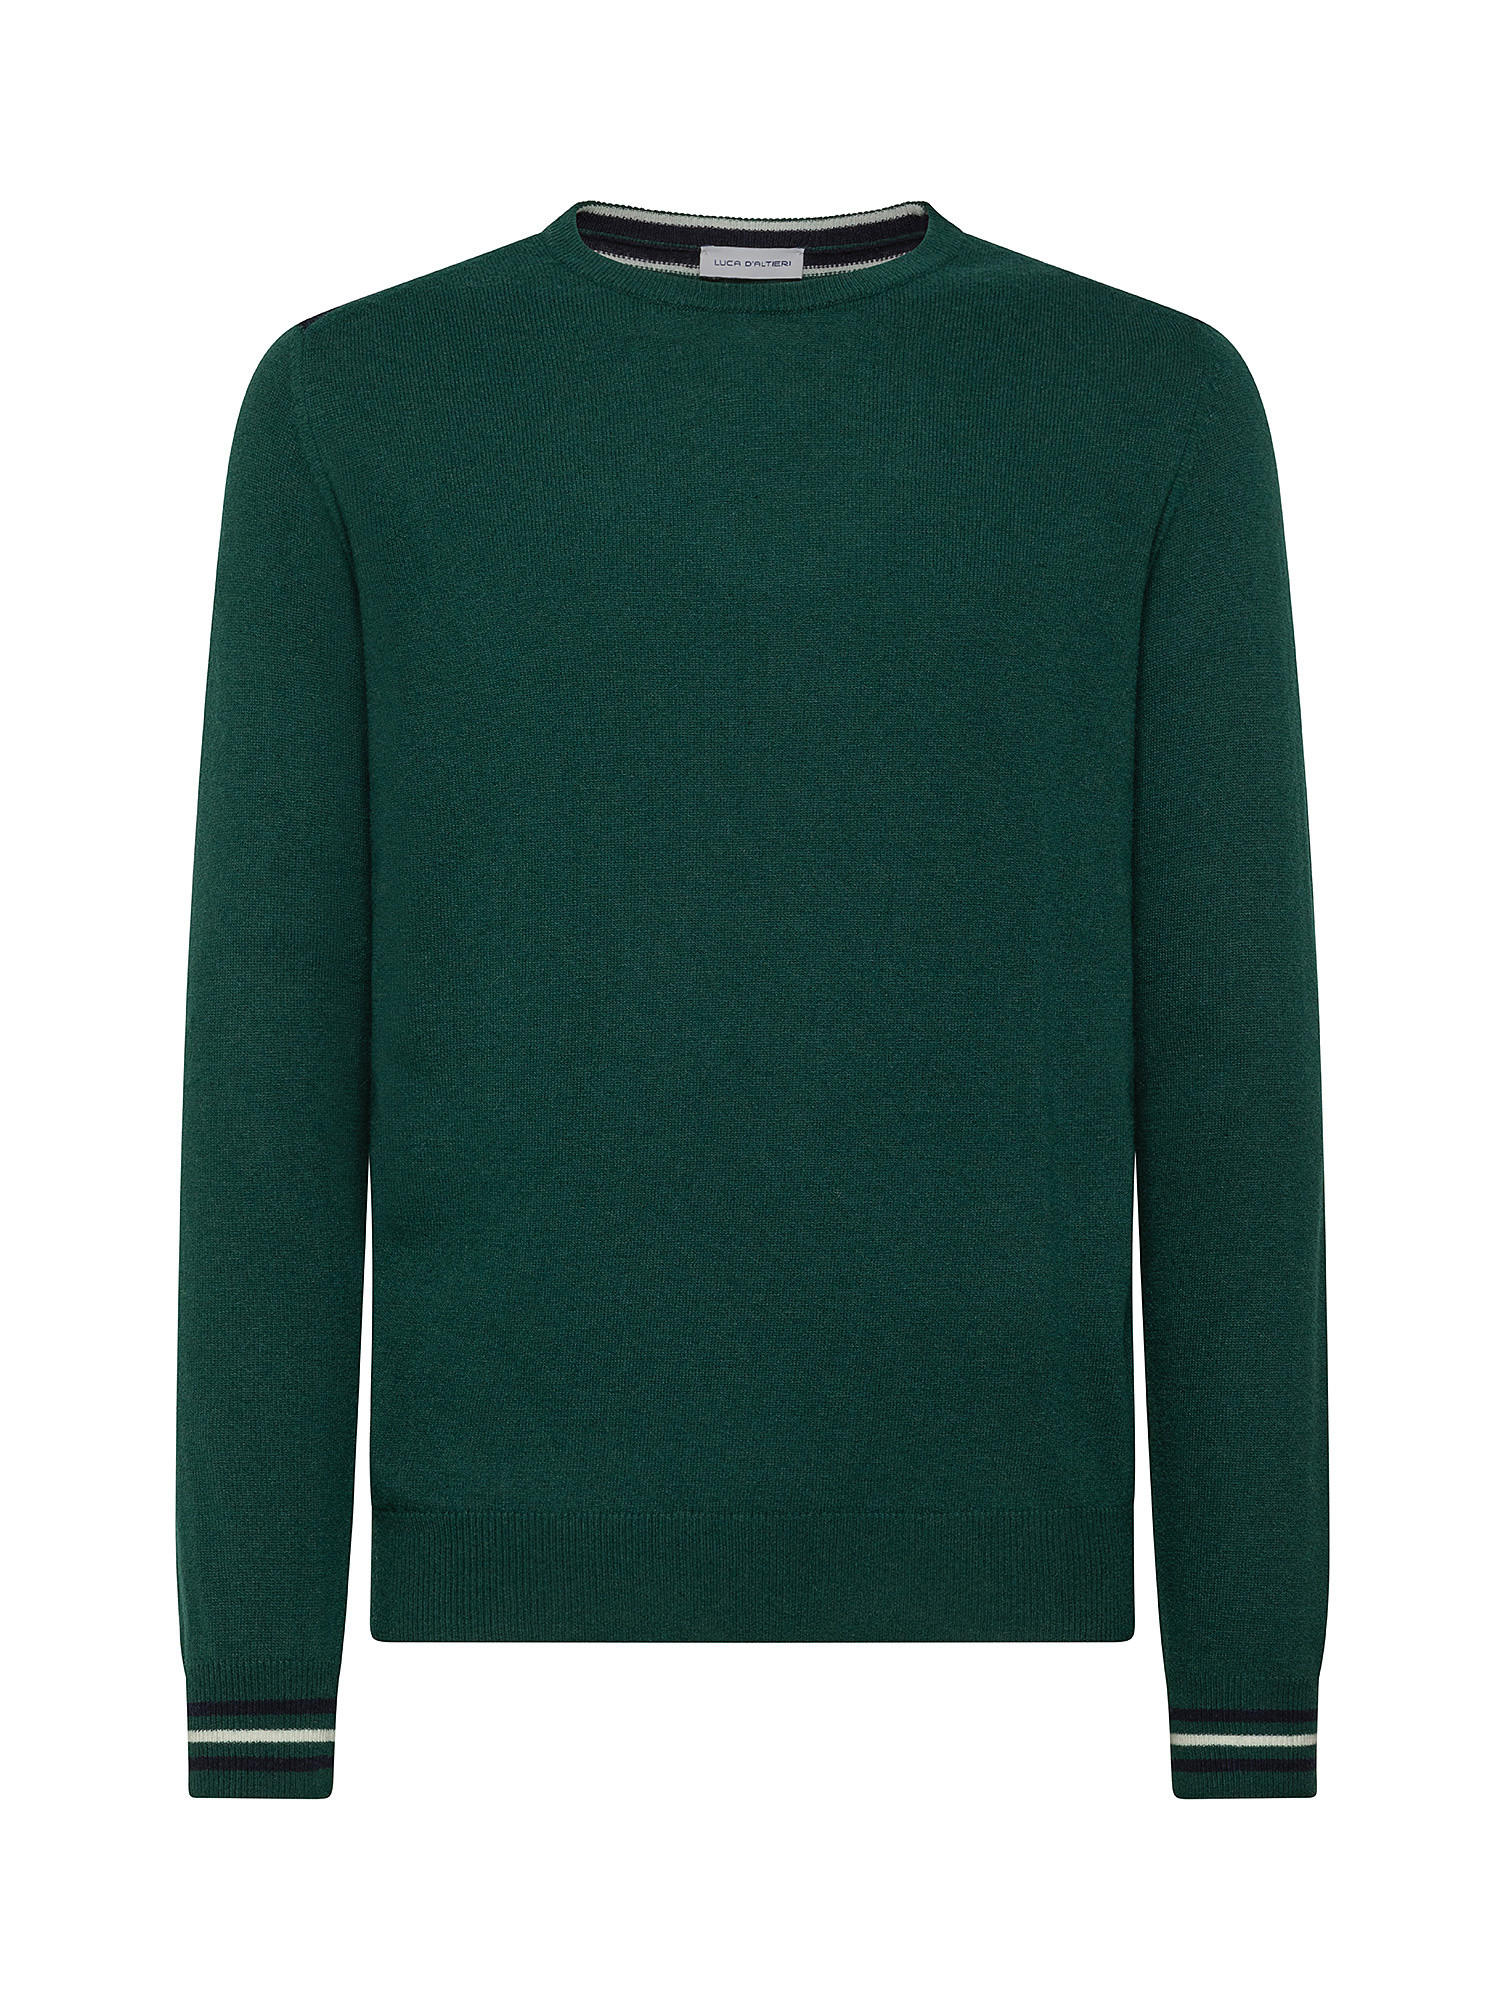 Crewneck sweater with Blend cashmere insert, Green, large image number 0